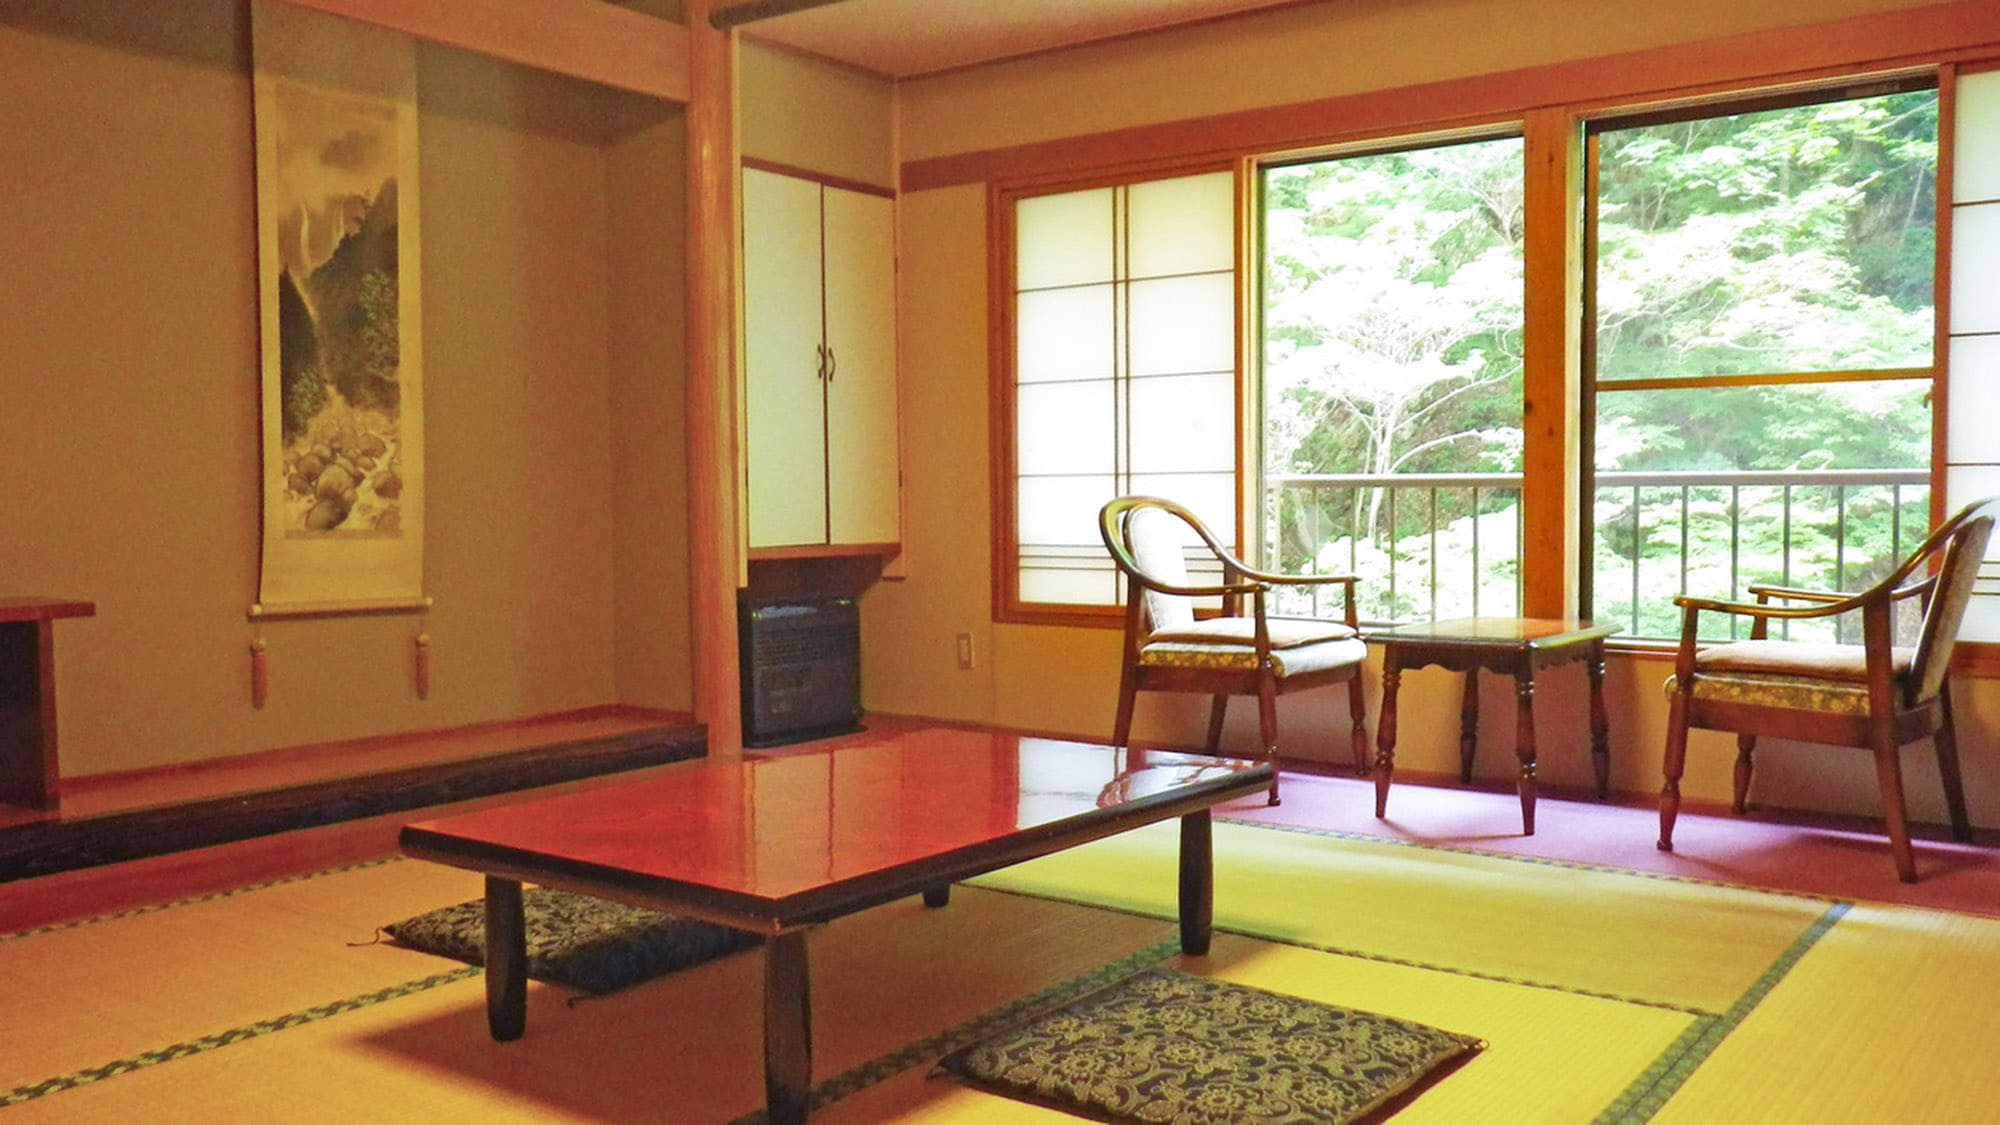 ・[Room] A calming Japanese space. Relax on the tatami mats